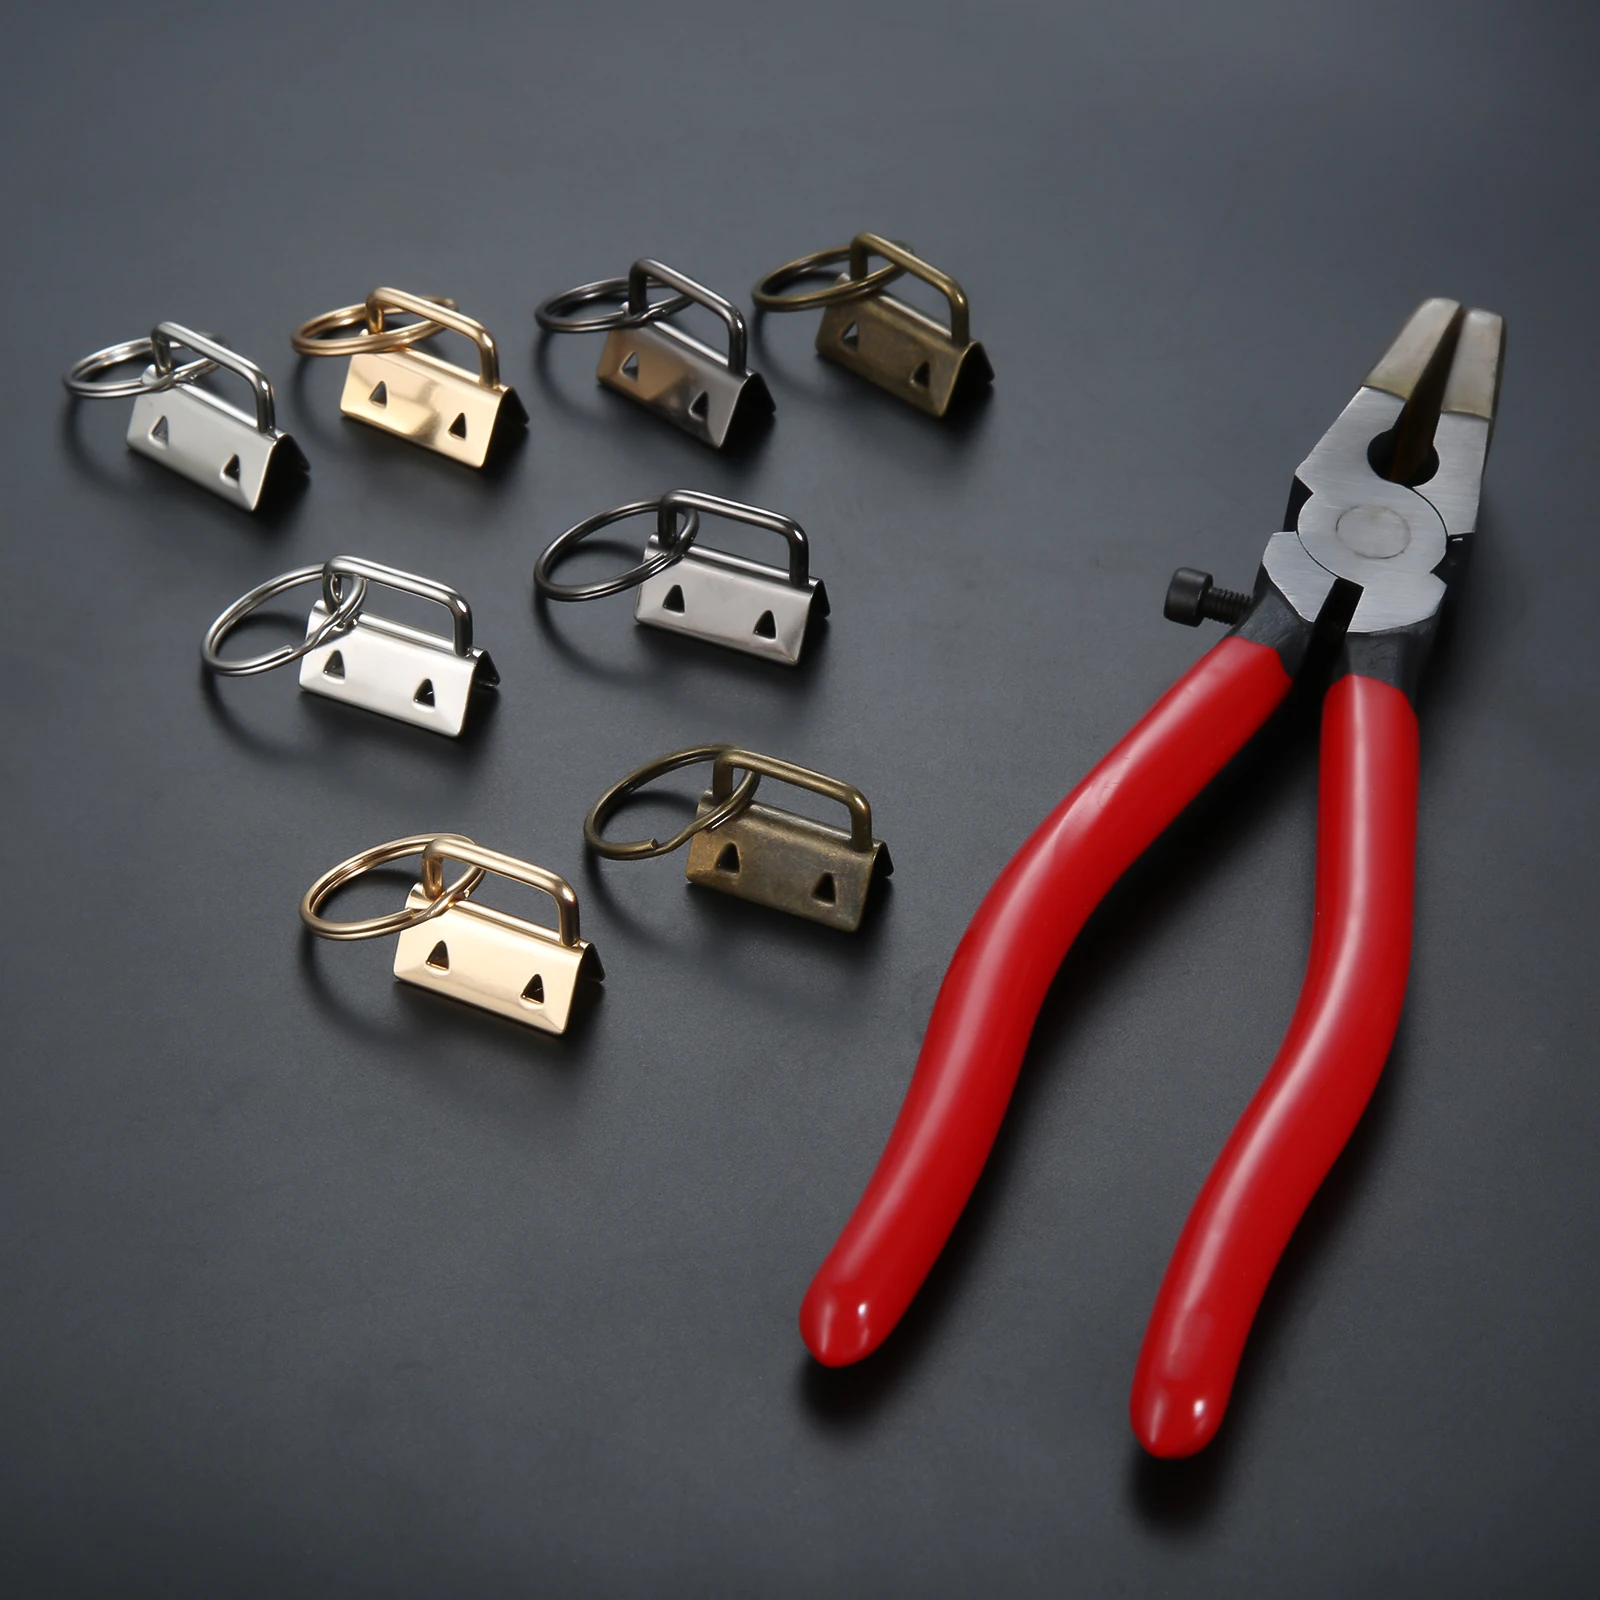 25mm 4 Color Key Fob Keychain Hardware With Pliers Tool Set For